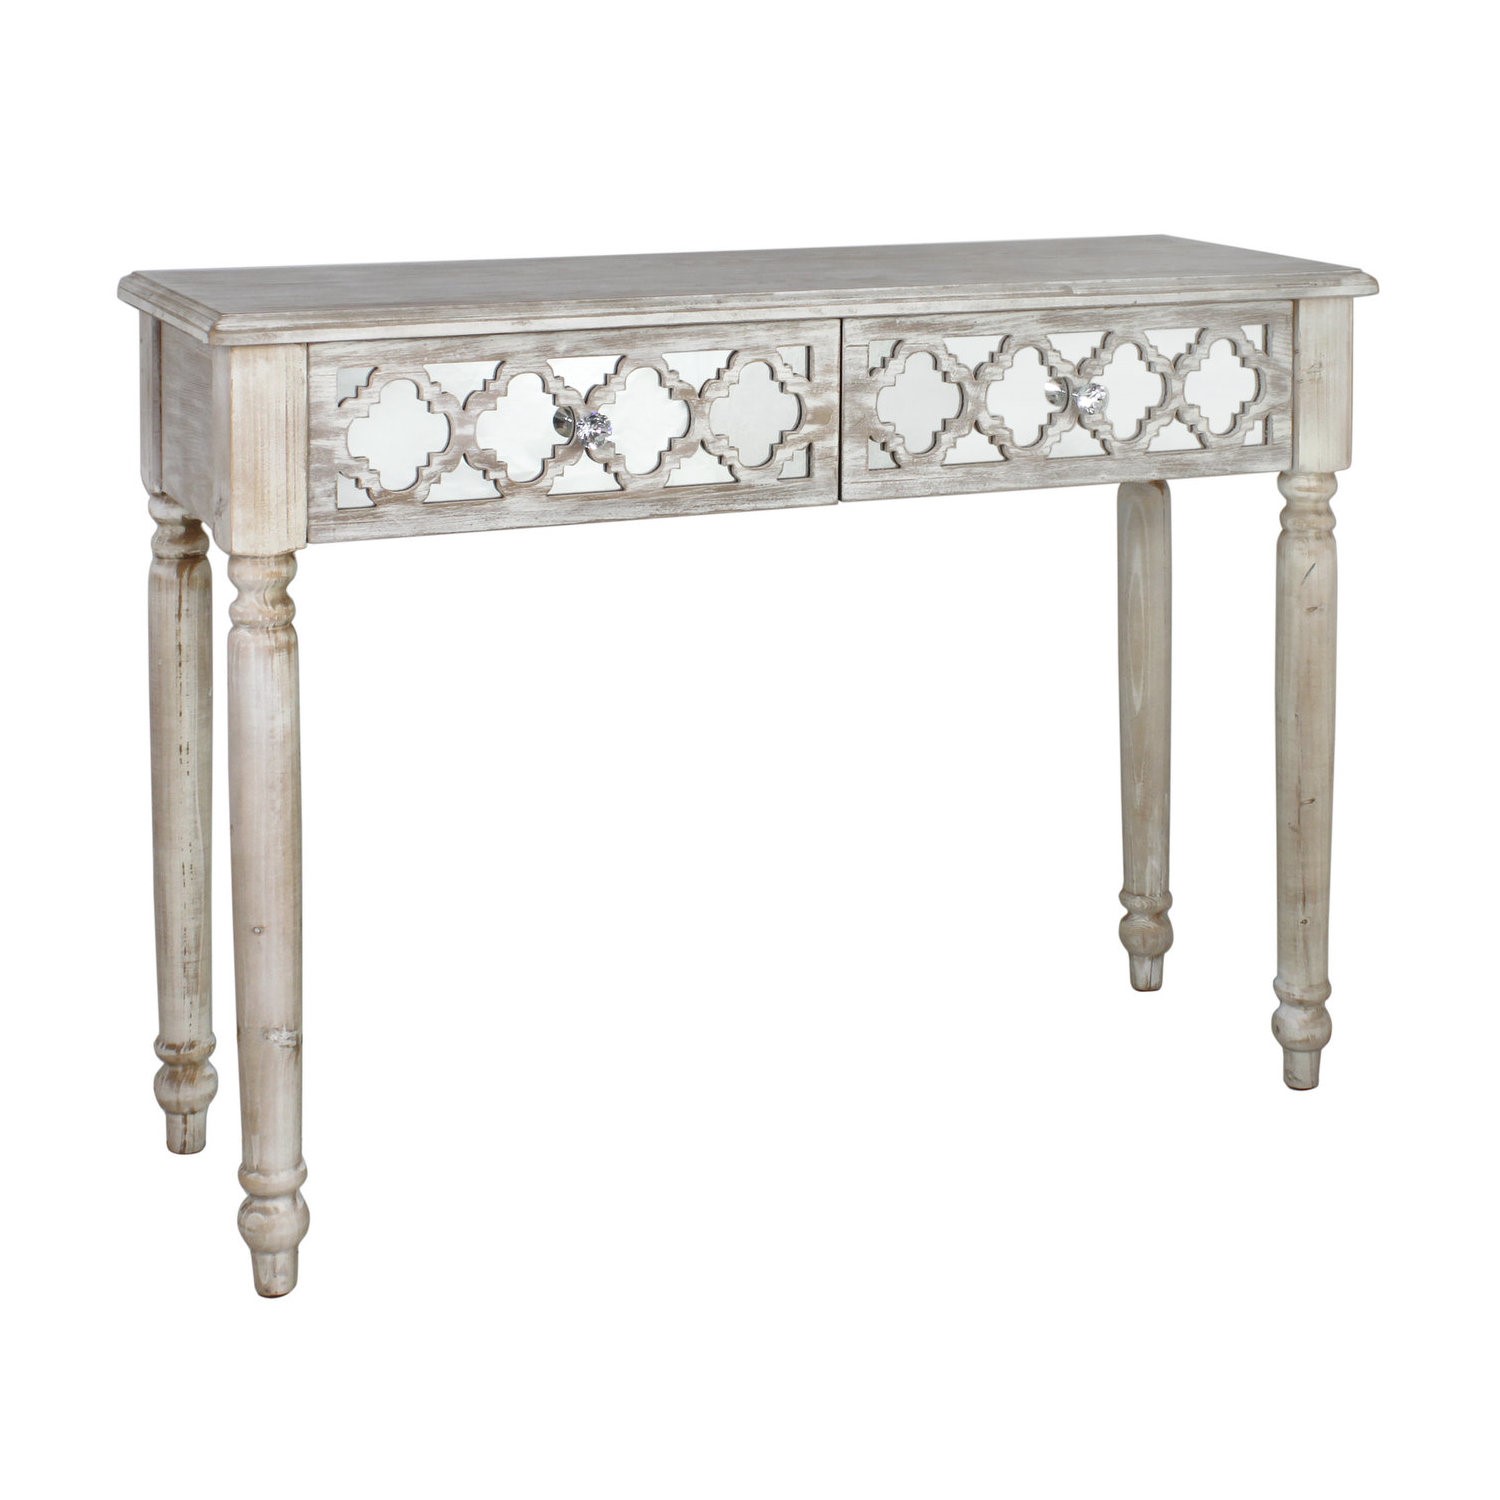 Photo of Aurora boutique miami beach mirrored wood ash 2 drawer console table